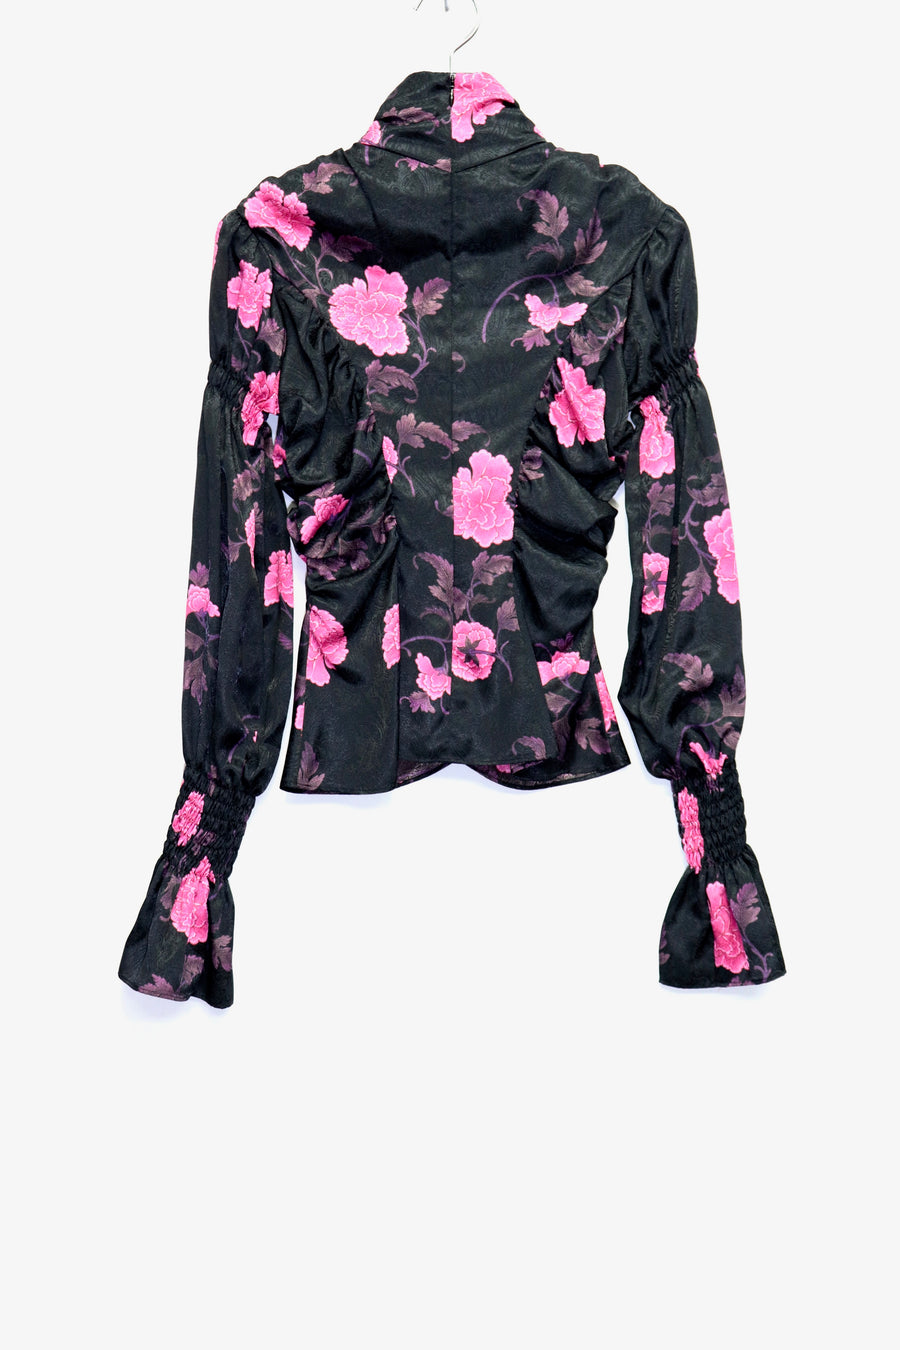 FETICO(フェティコ)のFloral Print Gathered Blouseの通販｜PALETTE